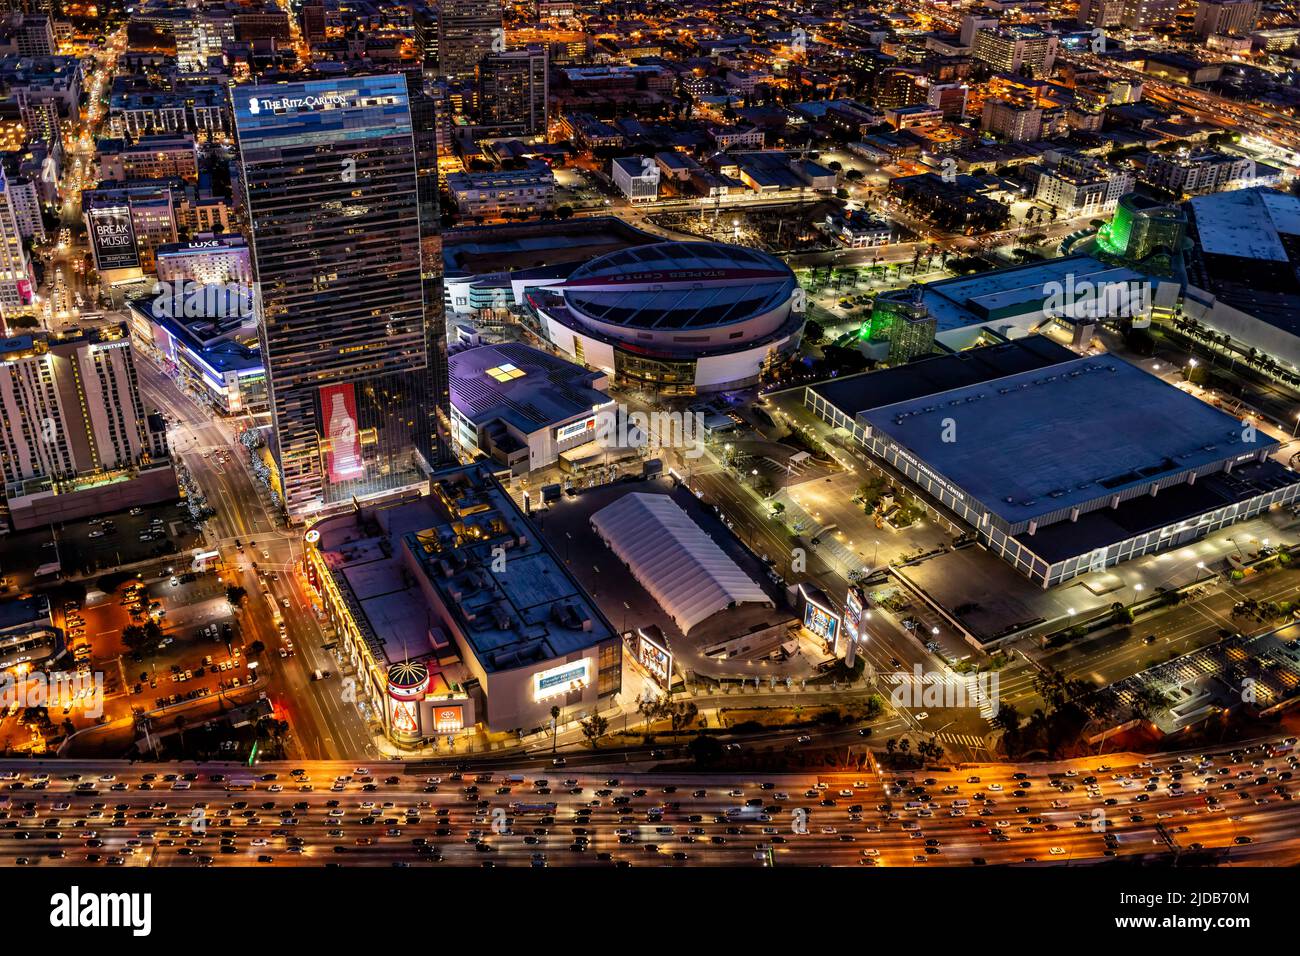 Evening aerial view of the Ritz Carlton, Microsoft Theatre and Staples Center. Stock Photo